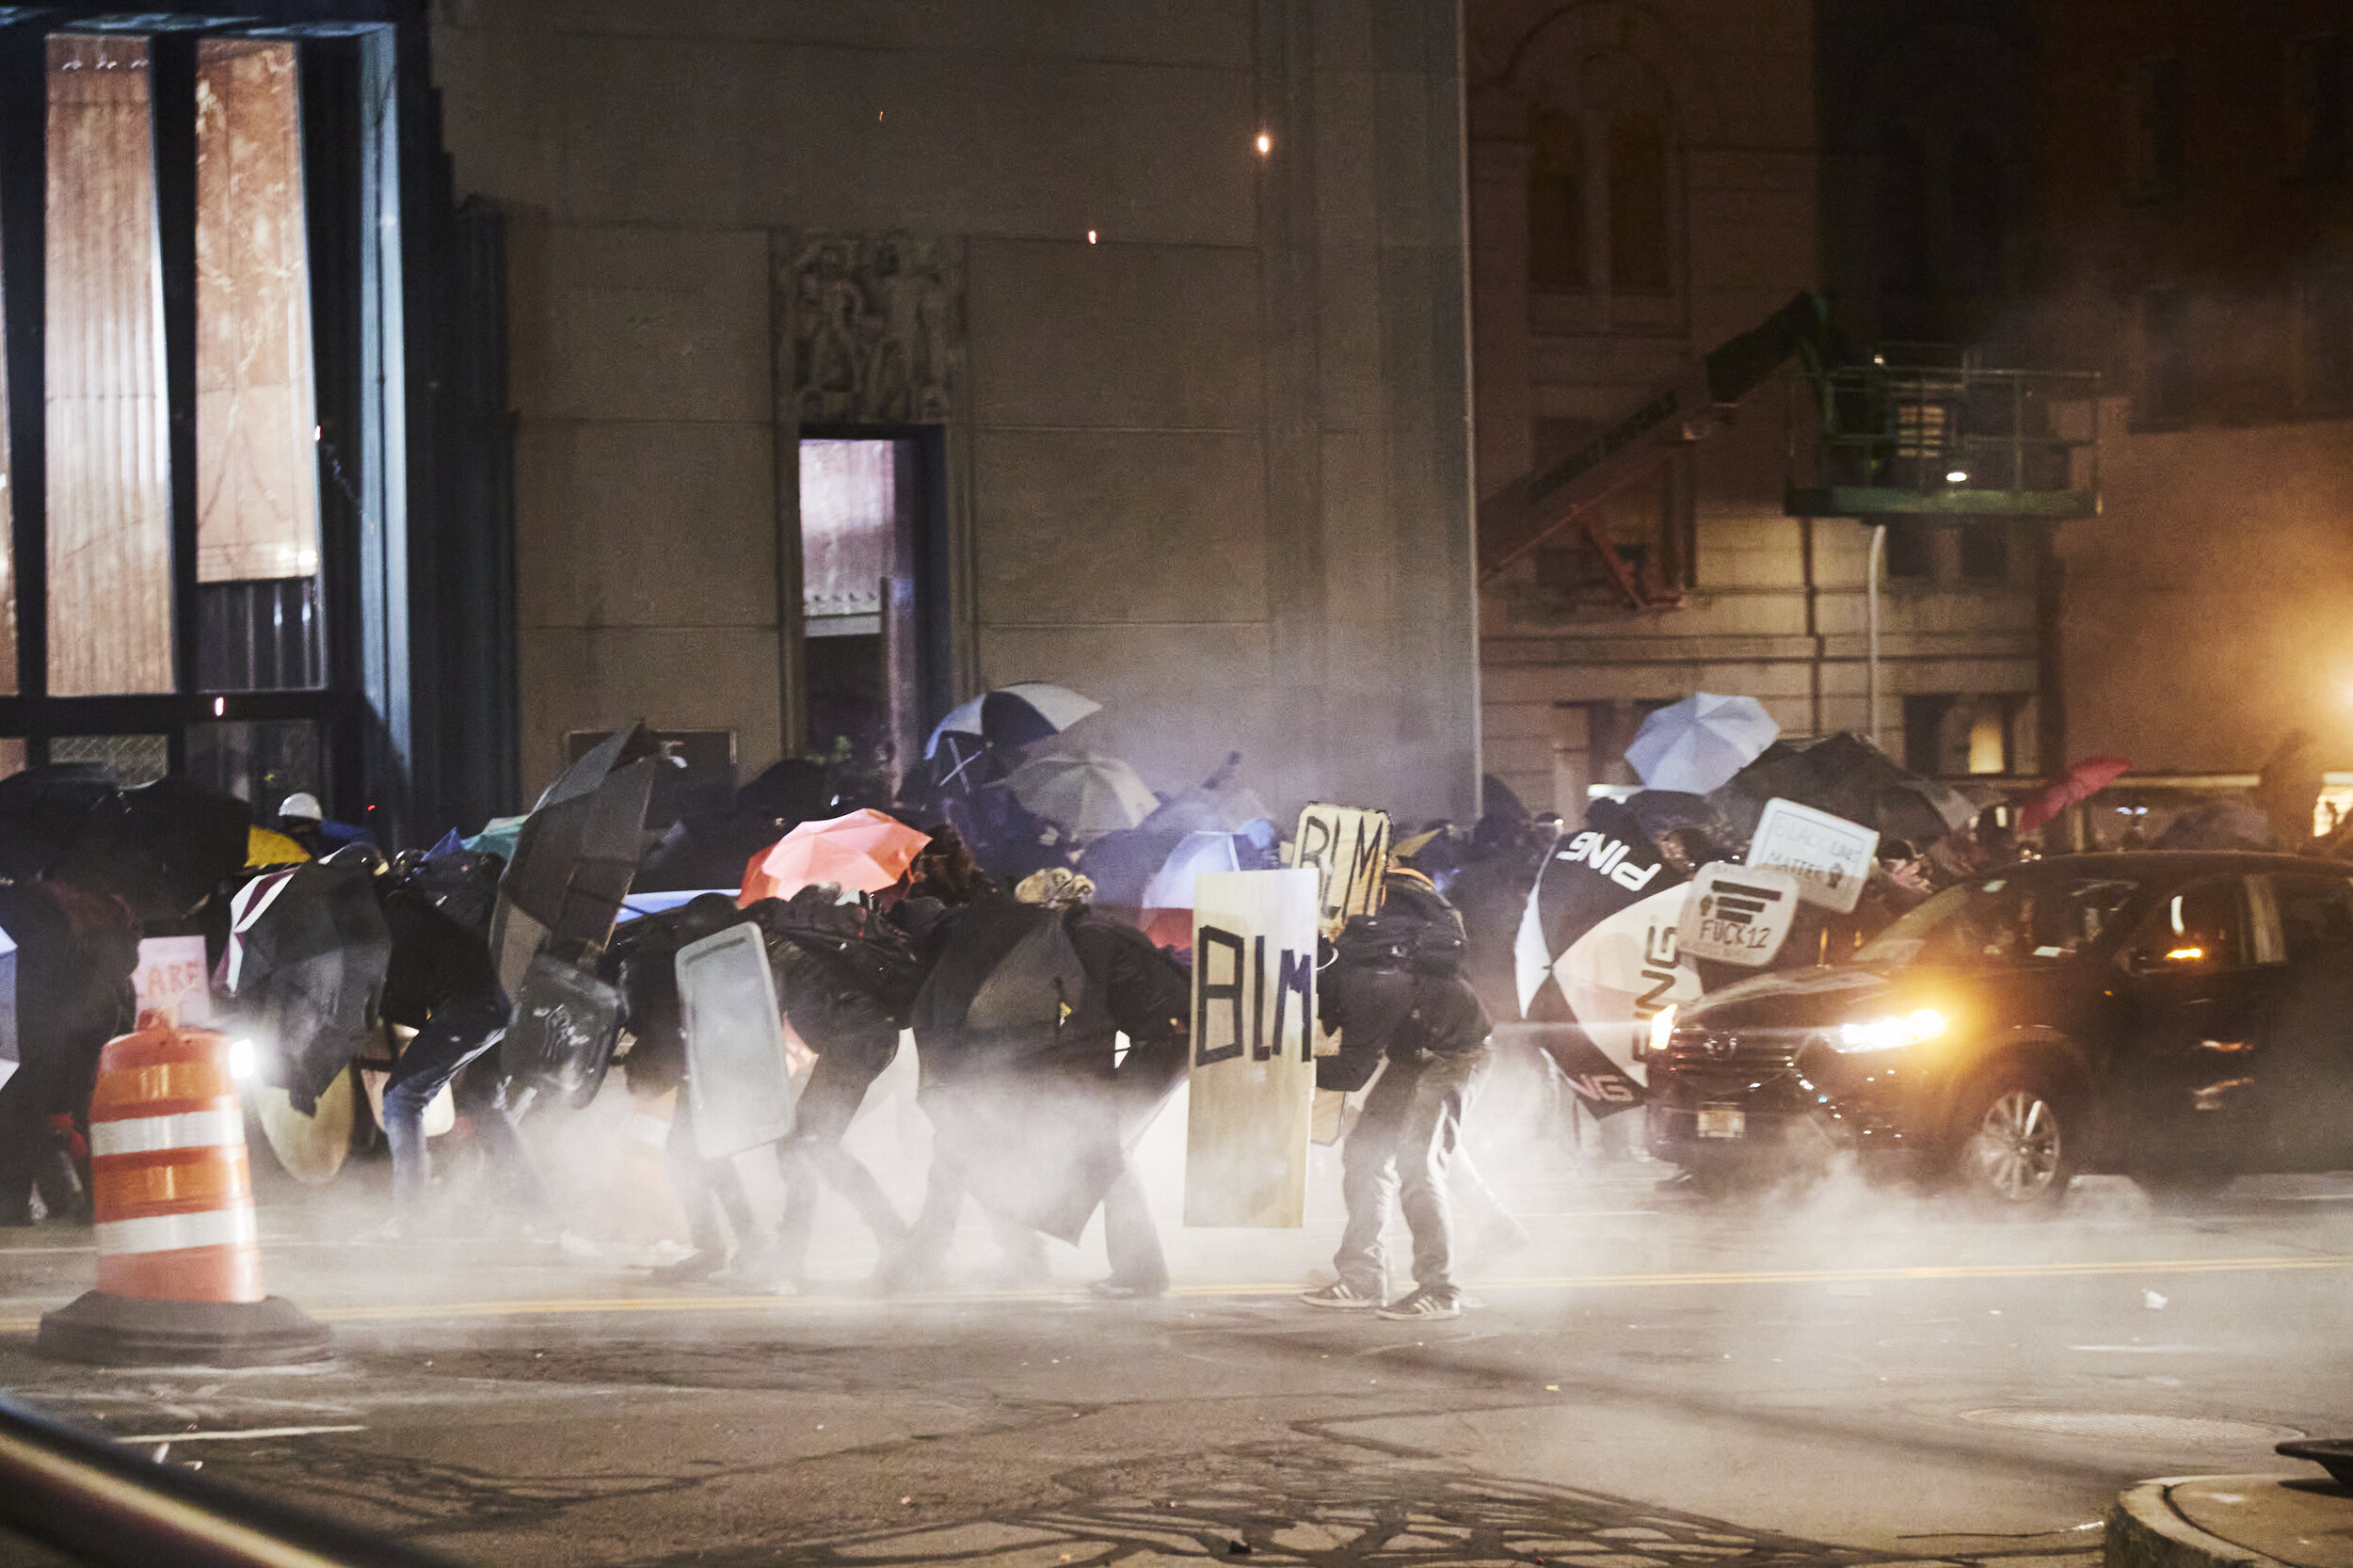  ROCHESTER, N.Y. - Sept 5, 2020: Frontline protestors with homemade shields and umbrellas are fired upon by police with pepper bullets and tear gas canisters.  